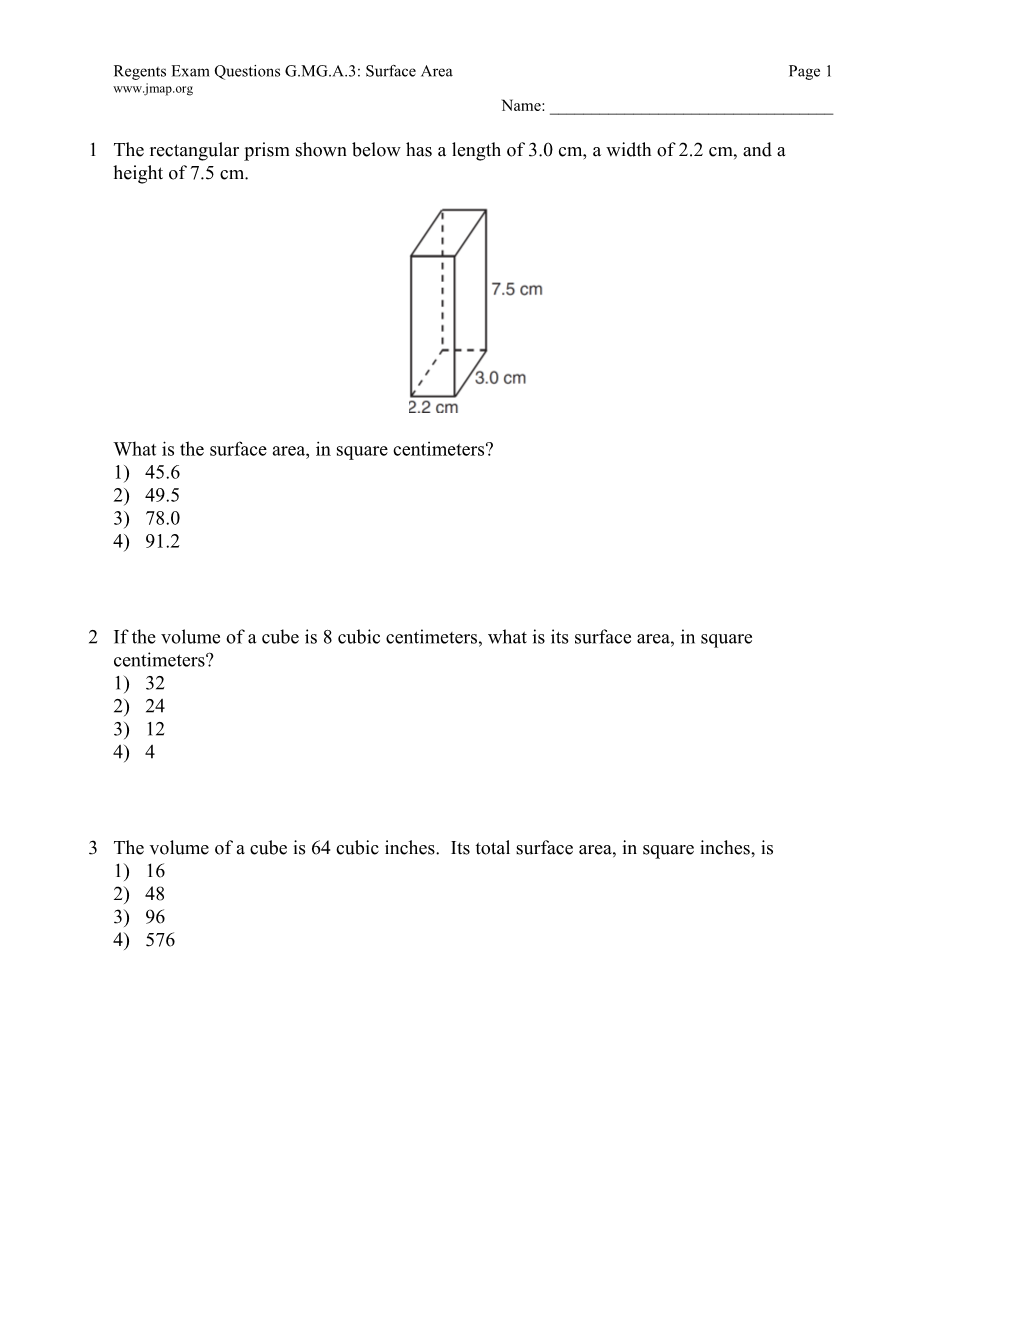 Regents Exam Questions G.MG.A.3: Surface Area Page 2